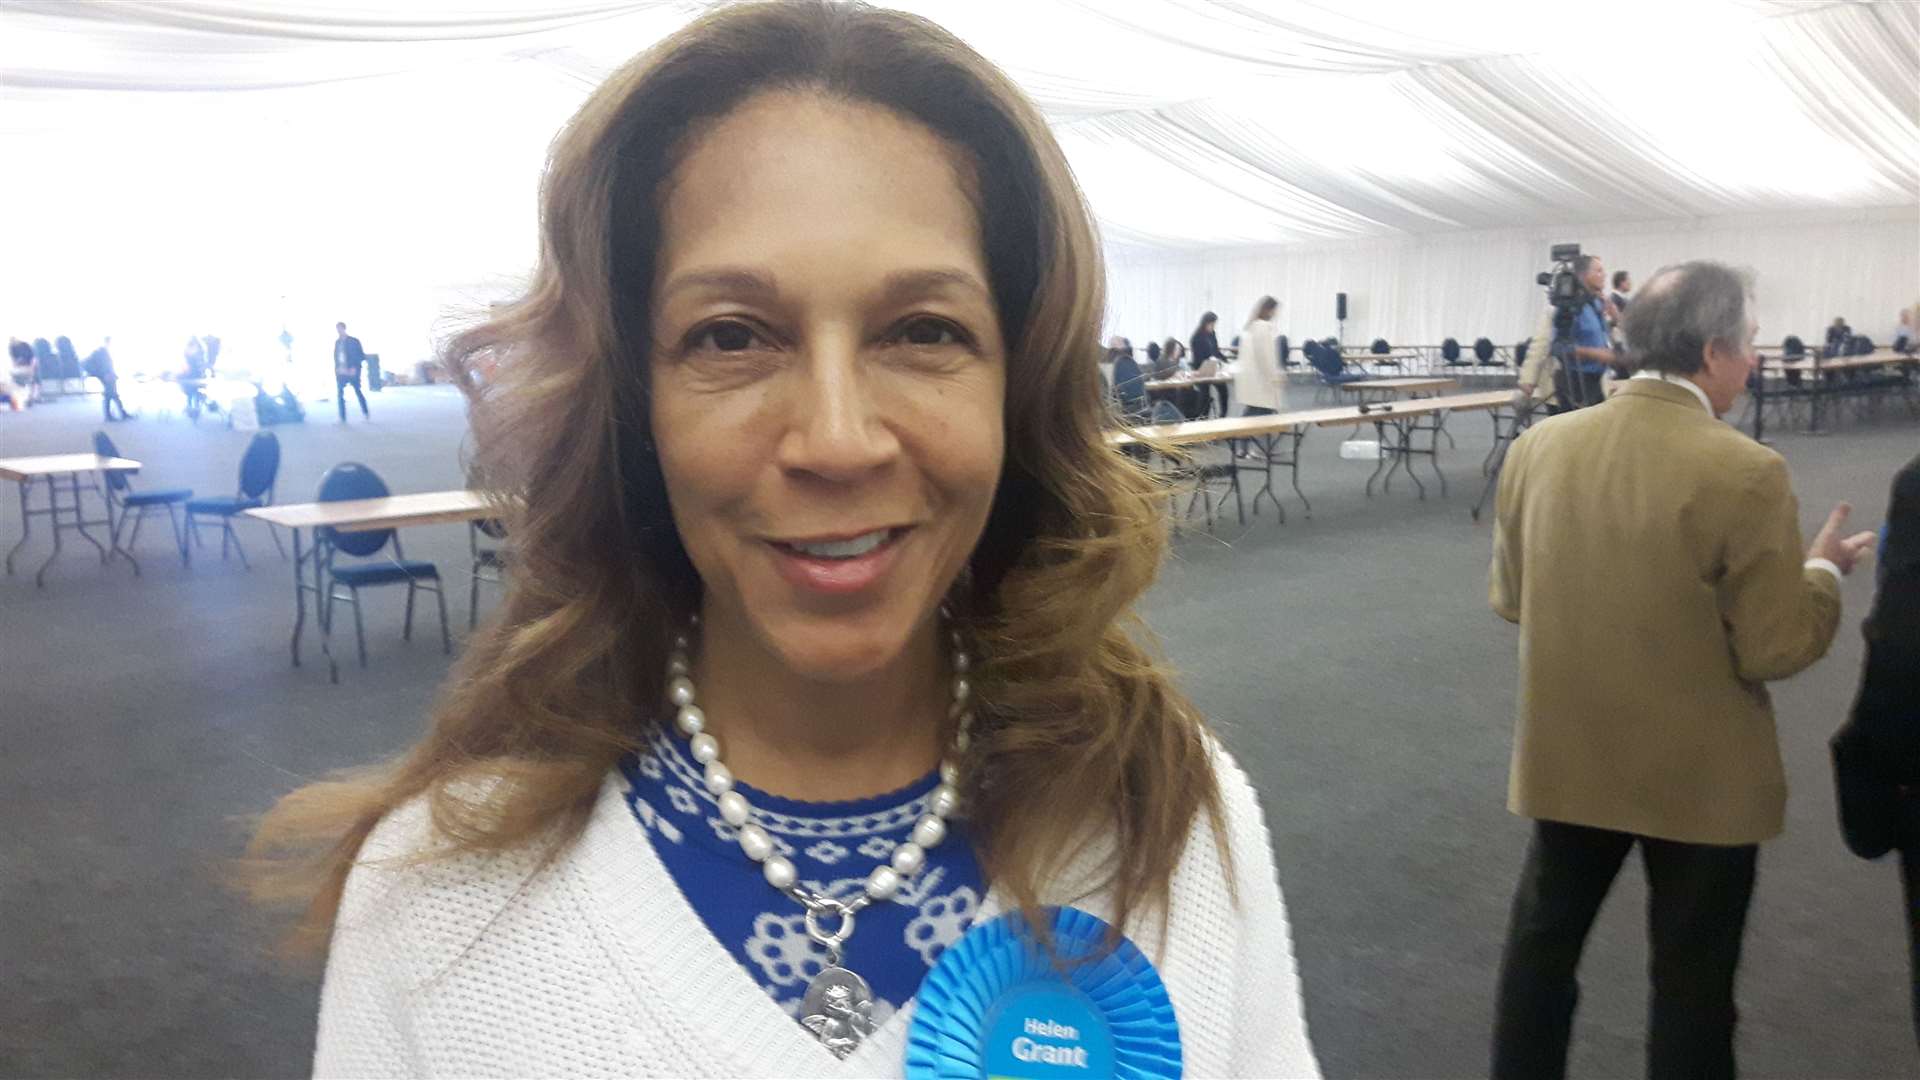 Helen Grant MP wished Boris Johnson well after he tested positive for Covid-19